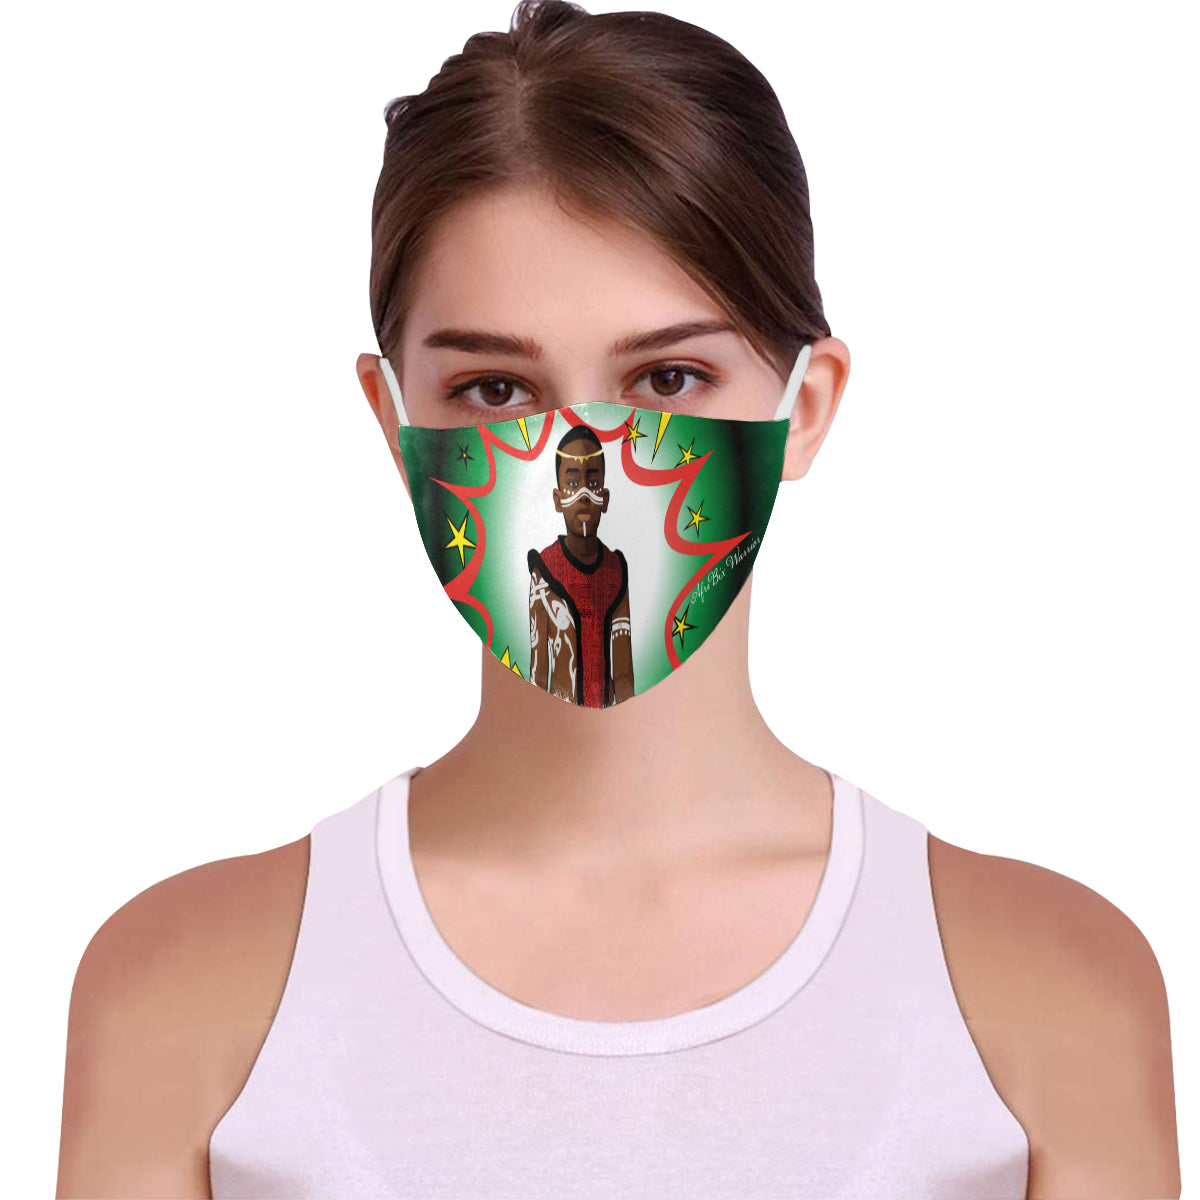 flyersetcinc Warrior Prince Cotton Fabric Face Mask with Filter Slot & Adjustable Strap (Pack of 5) - Non-medical use